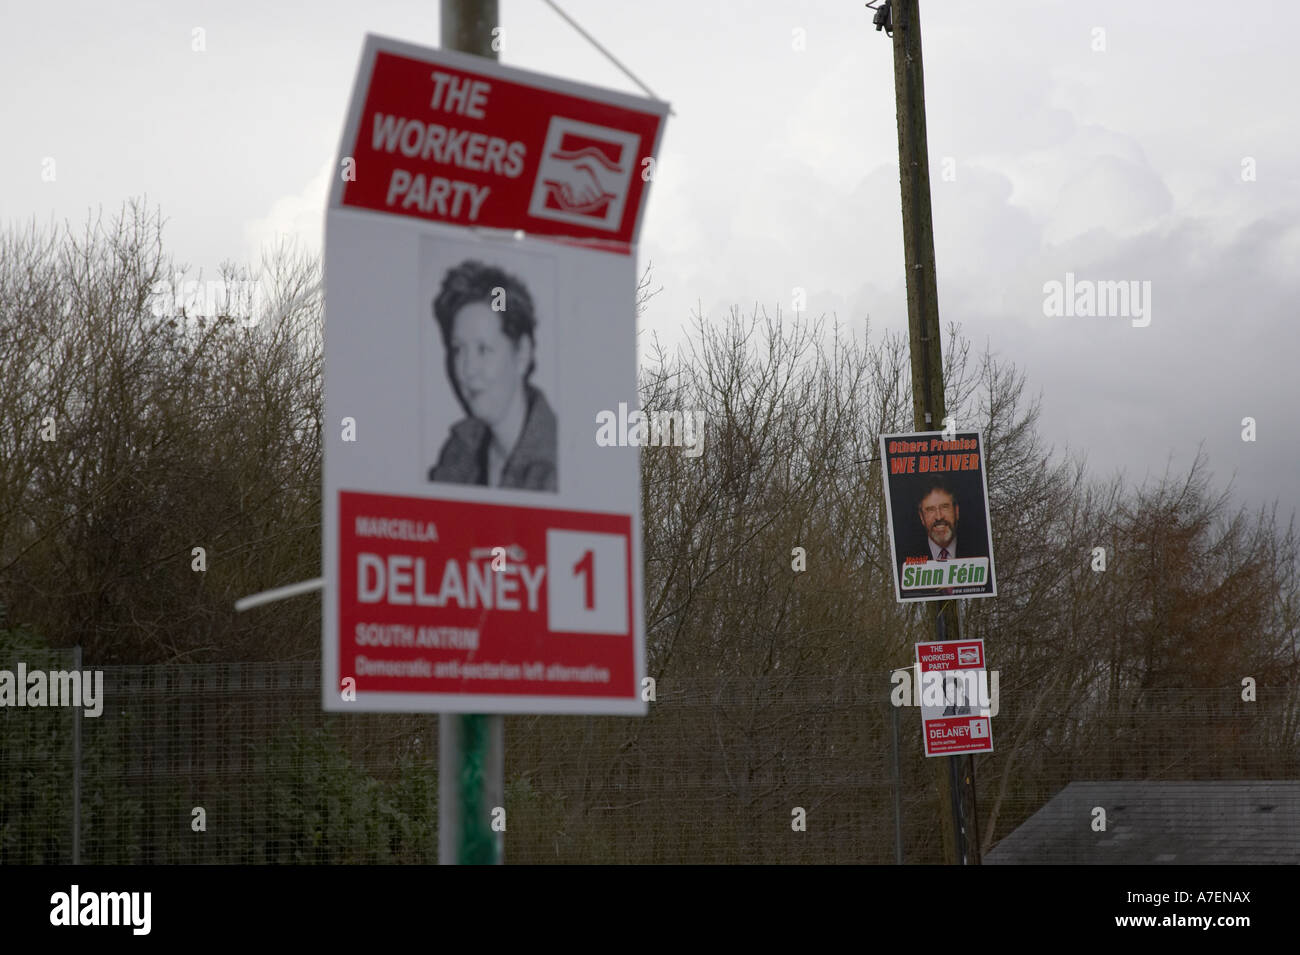 election posters for the workers party and sinn fein put on poles for northern ireland assembly elections 2007 Stock Photo